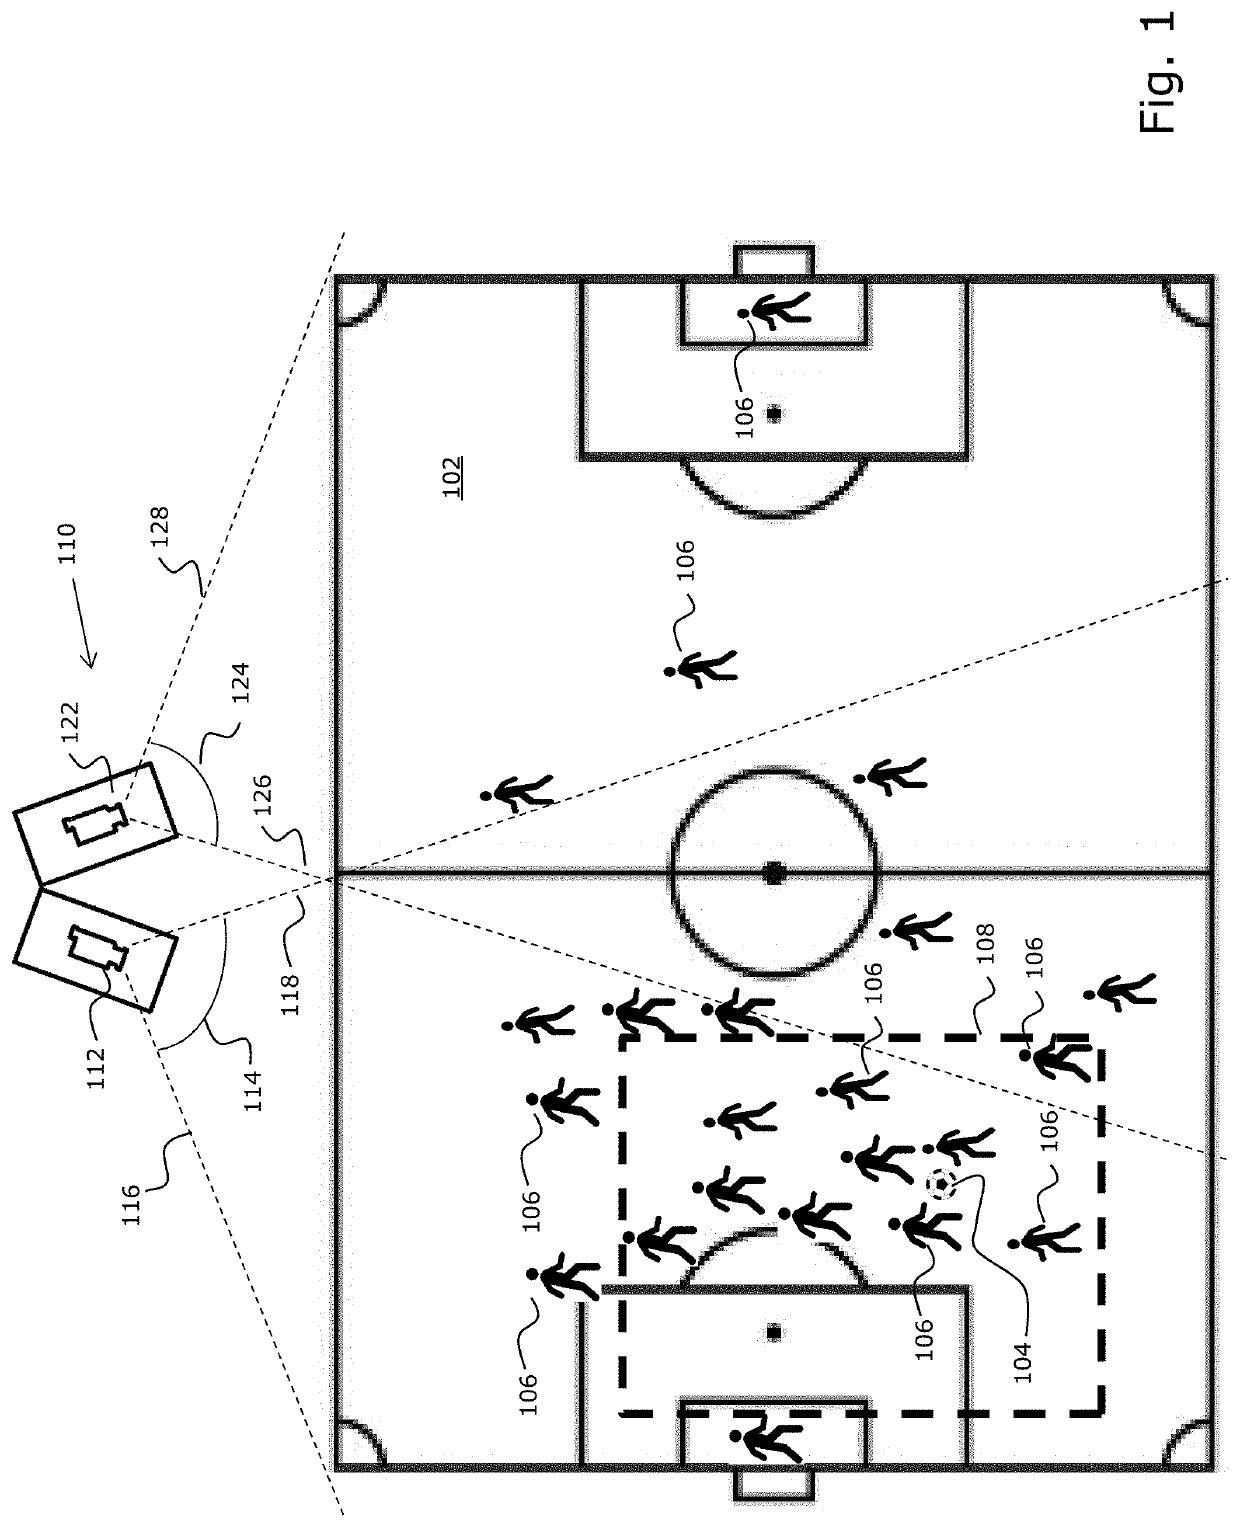 Computer-implemented method for automated detection of a moving area of interest in a video stream of field sports with a common object of interest